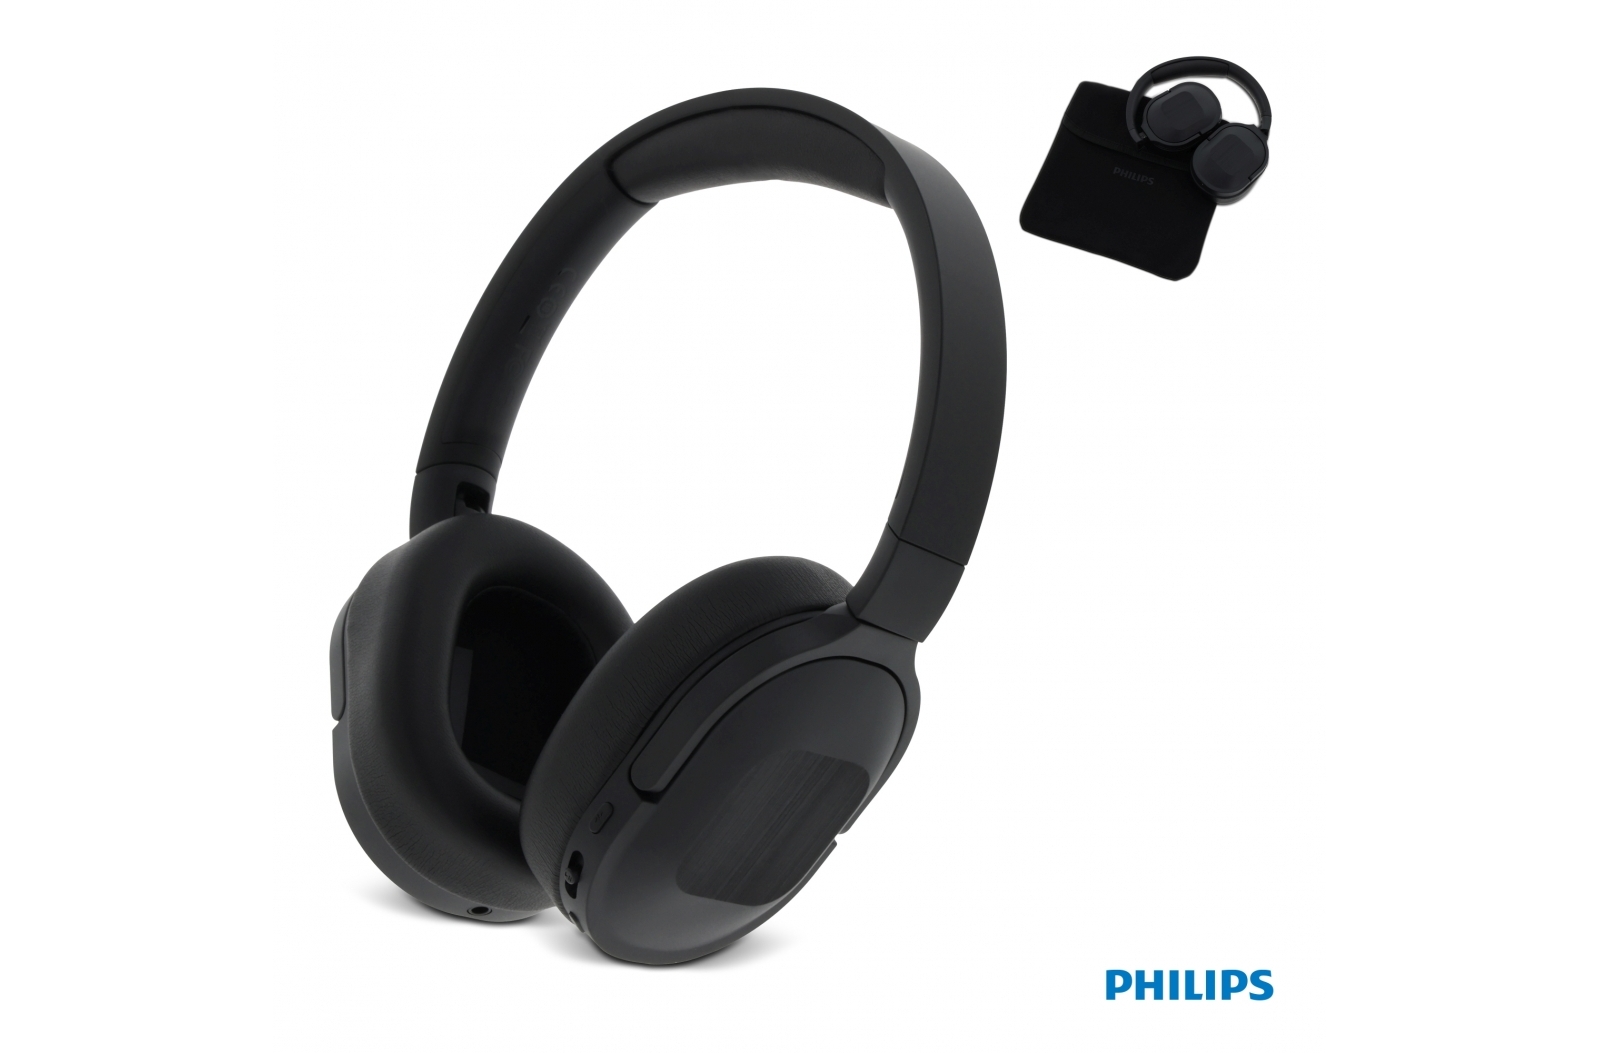 Wireless headphones with bass boost and active noise cancellation - Little Witley - Yattendon